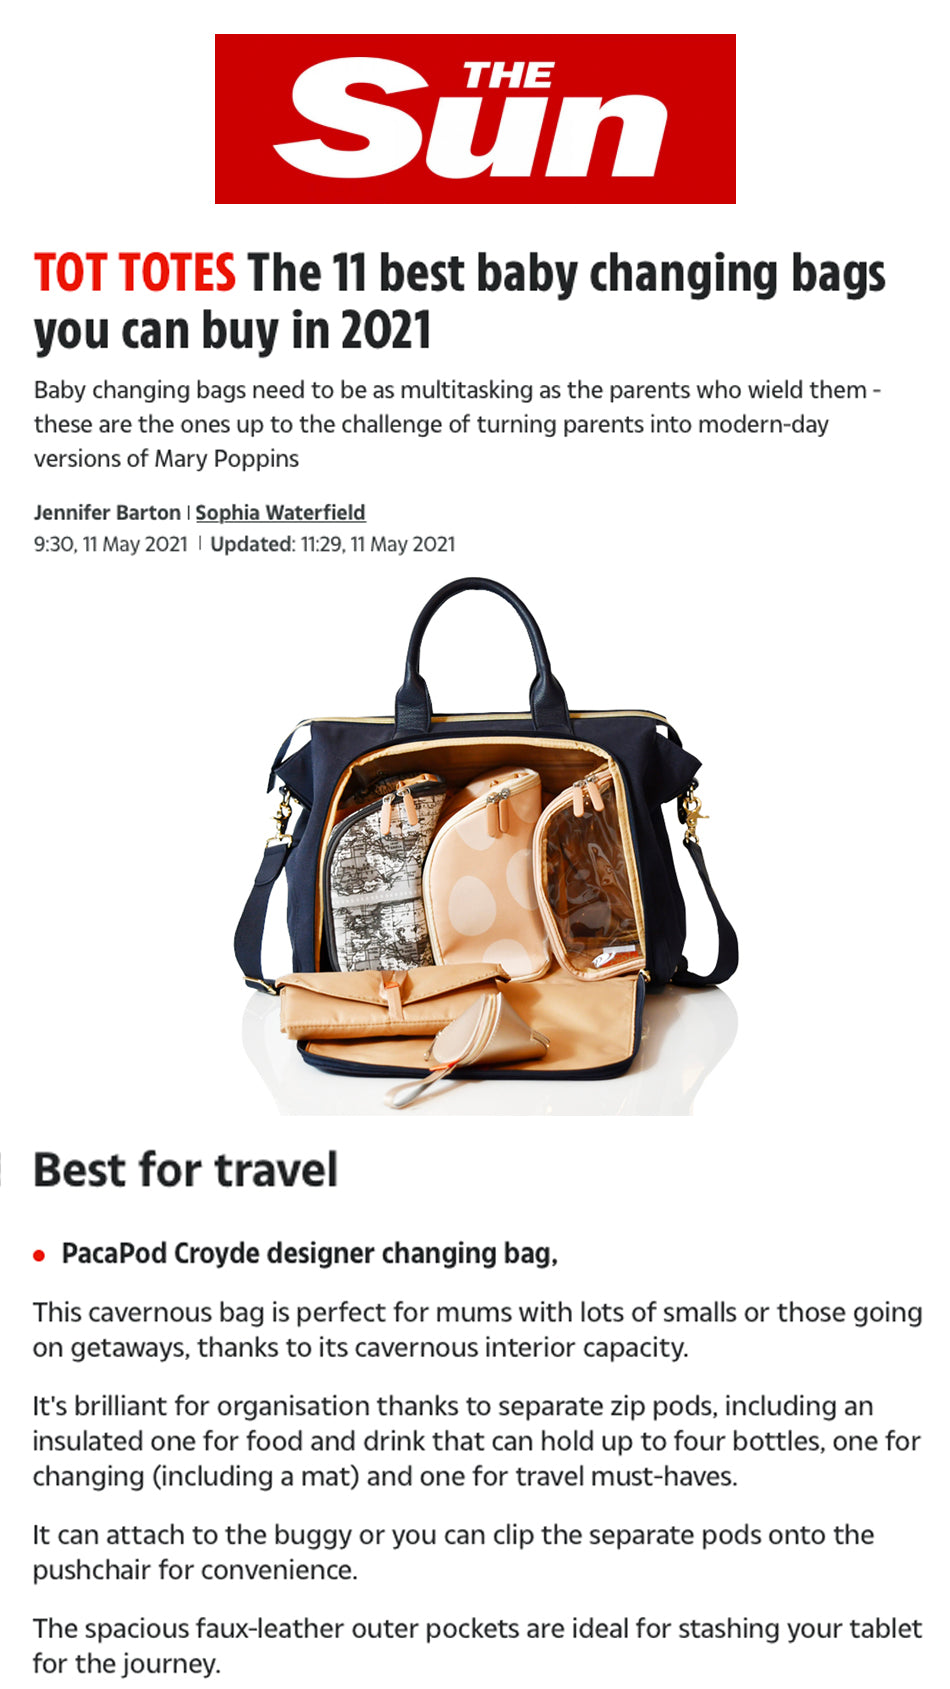 The Sun - Best Changing Bag 2021